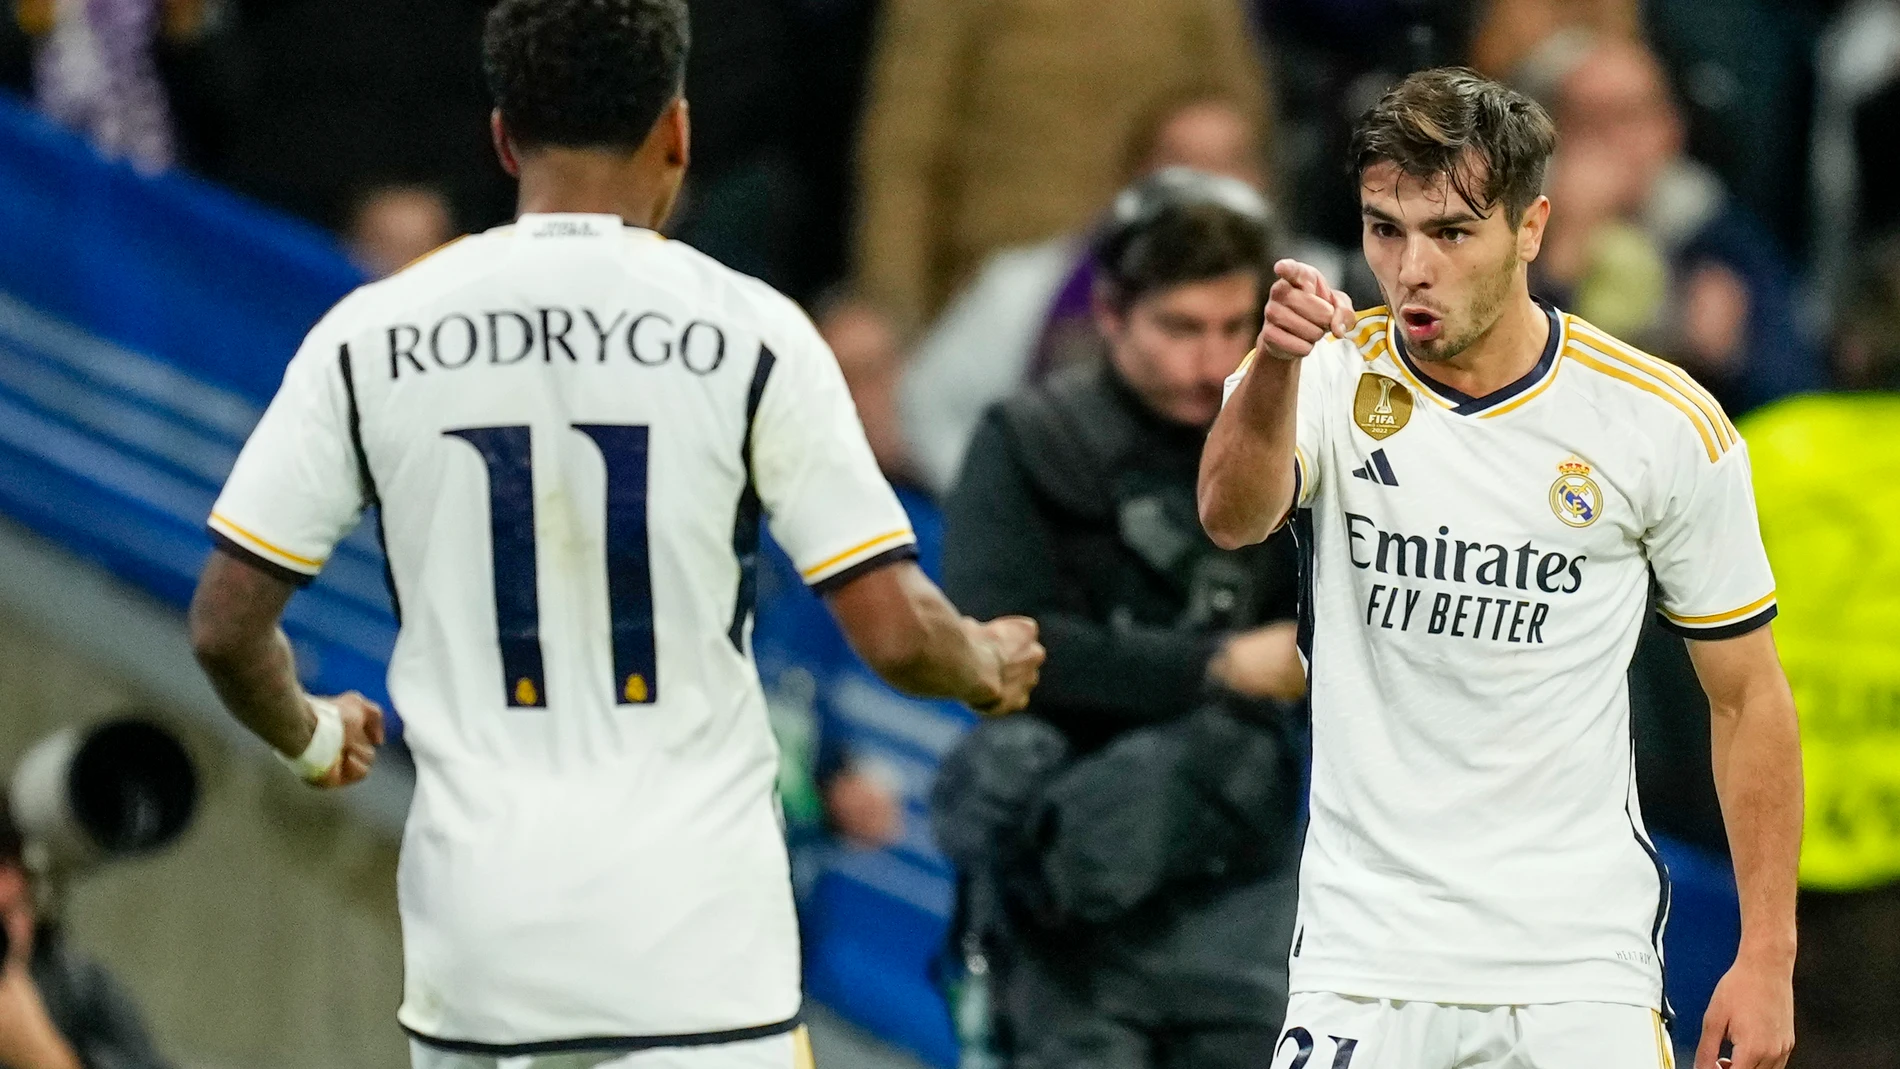 Real Madrid's Brahim Diaz, right, celebrates with Real Madrid's Rodrygo after scoring his side's opening goal during the Champions League Group C soccer match between Real Madrid and Braga at the Santiago Bernabeu stadium in Madrid, Spain, Wednesday, Nov. 8, 2023. (AP Photo/Jose Breton)